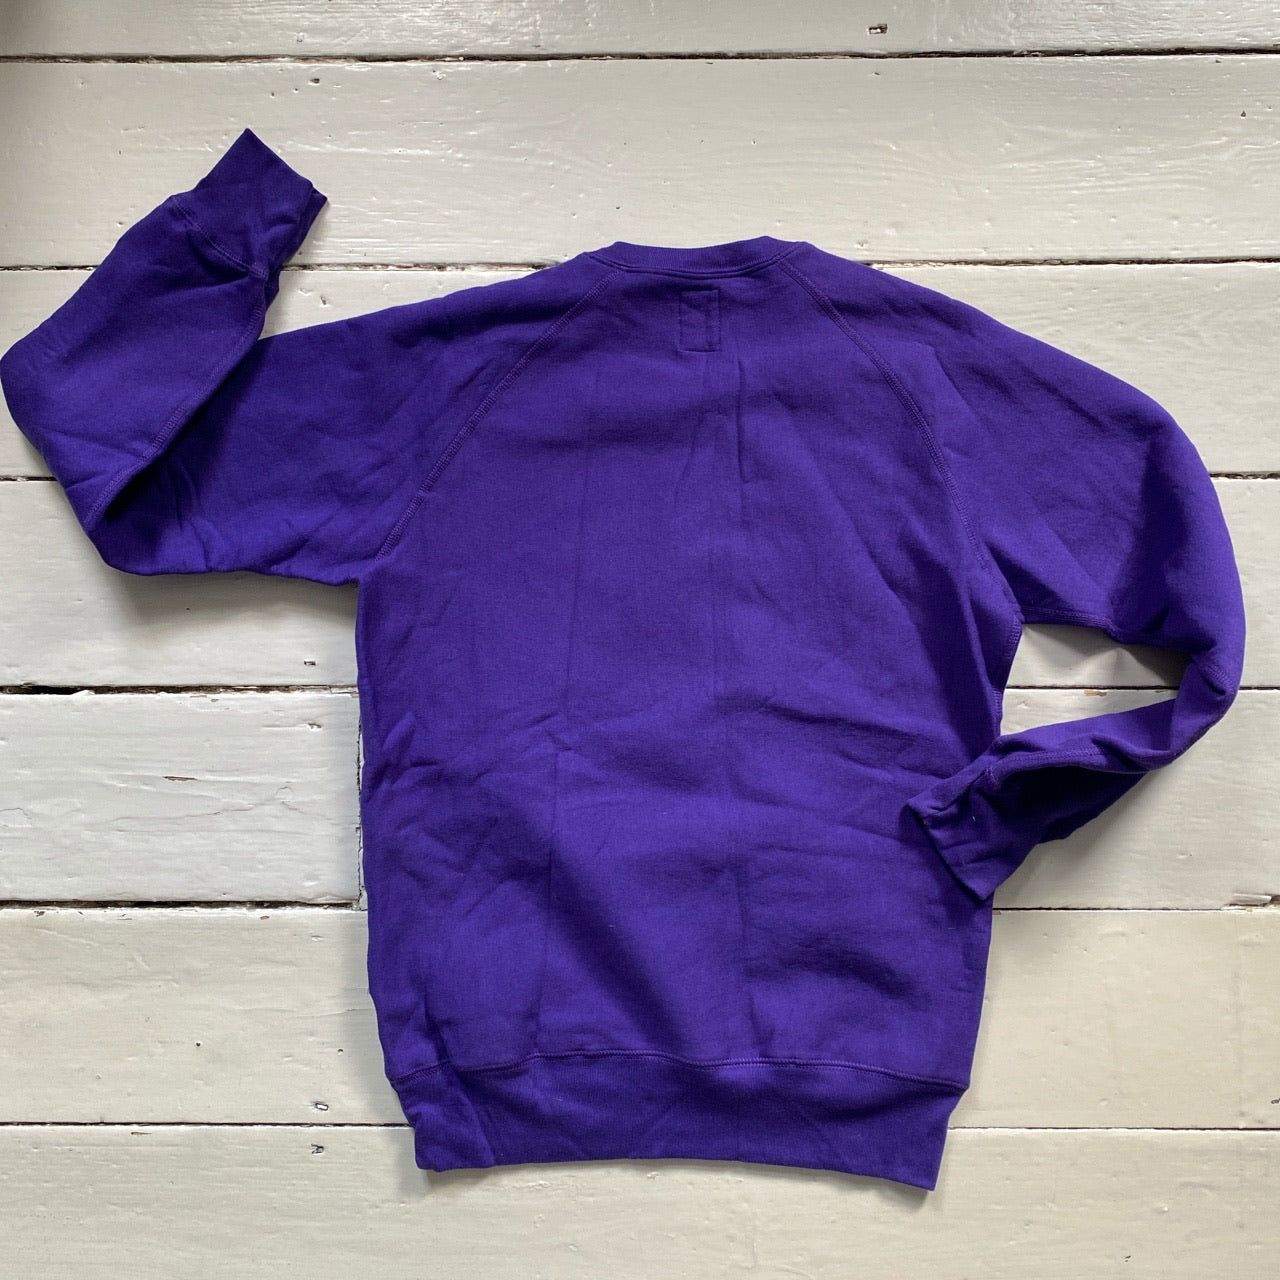 OVO Octobers Very Own Purple Jumper (Small)